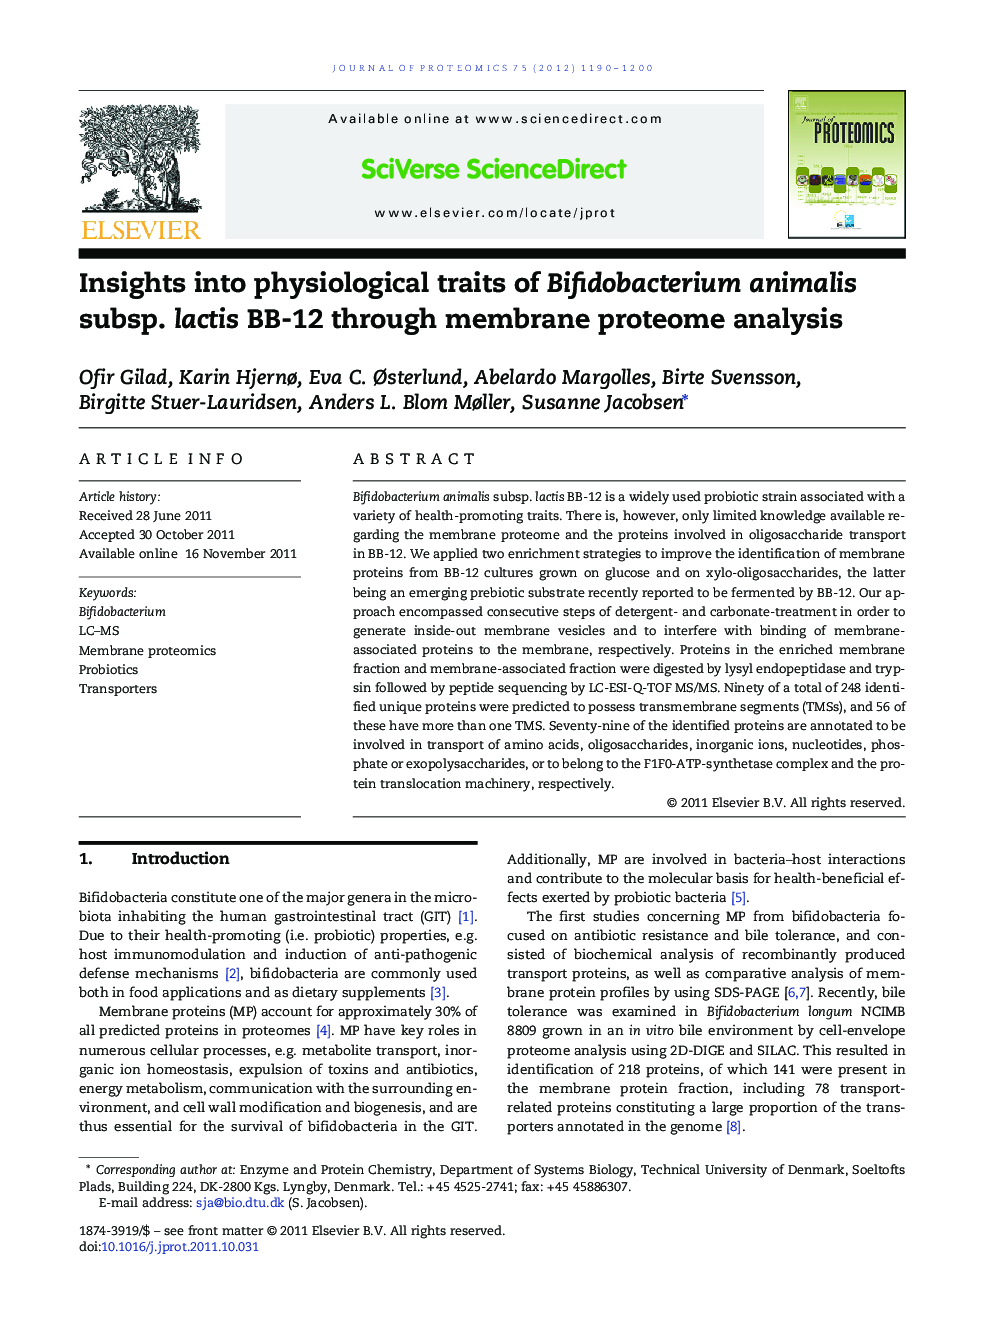 Insights into physiological traits of Bifidobacterium animalis subsp. lactis BB-12 through membrane proteome analysis